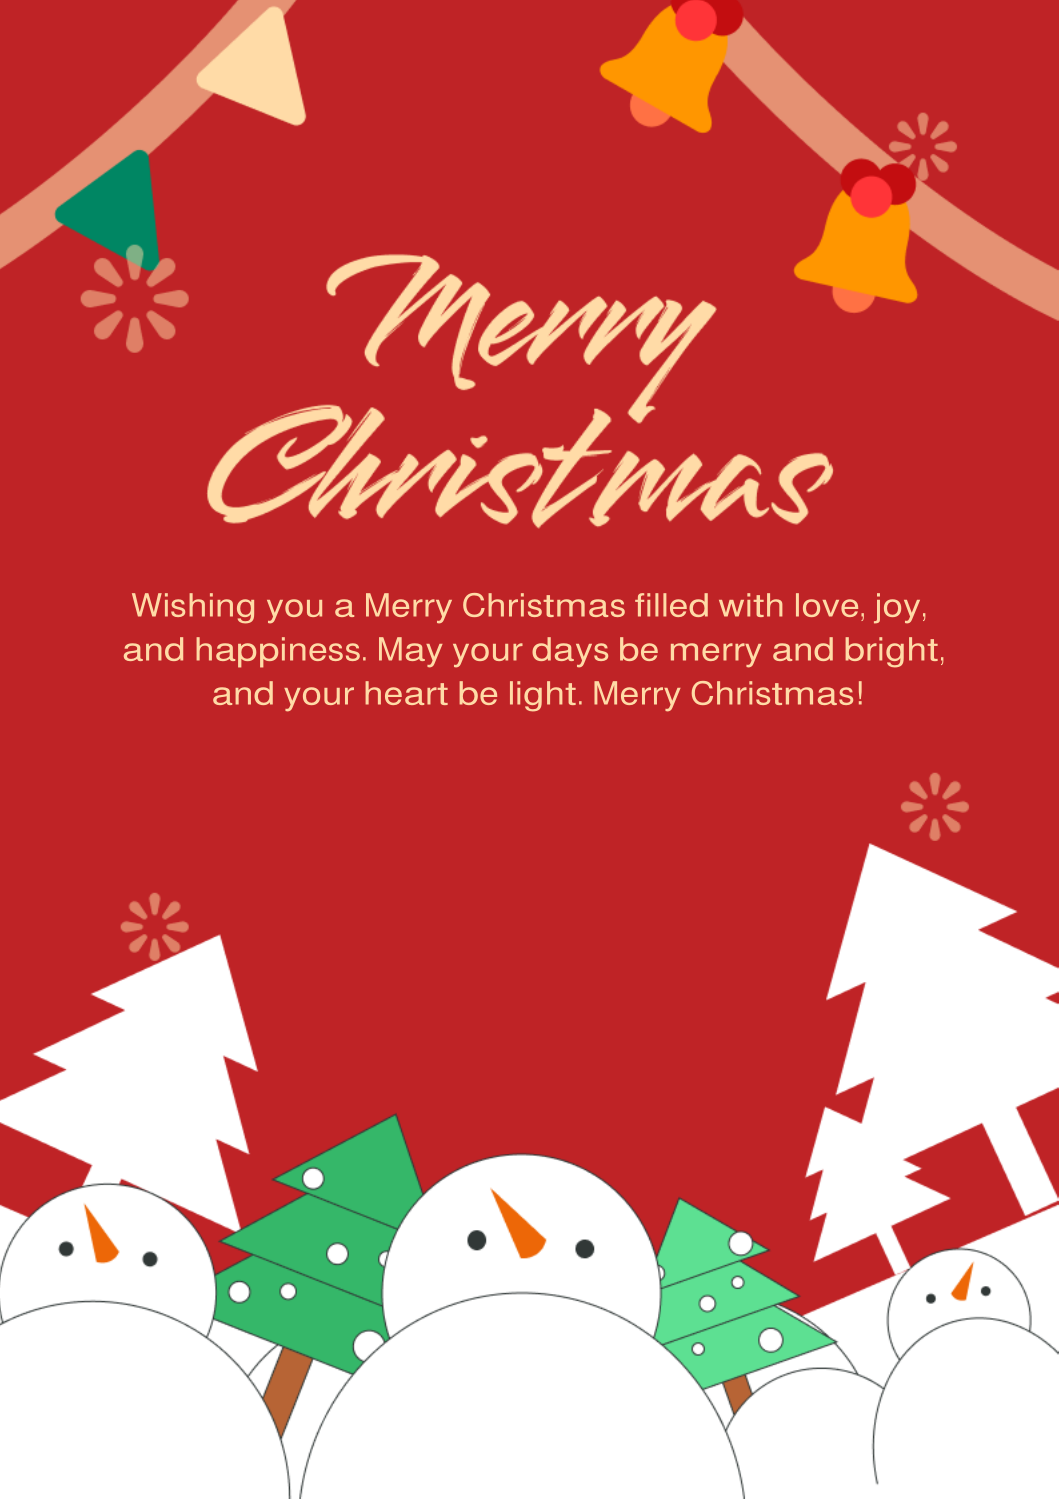 Merry Christmas wishes for love 2